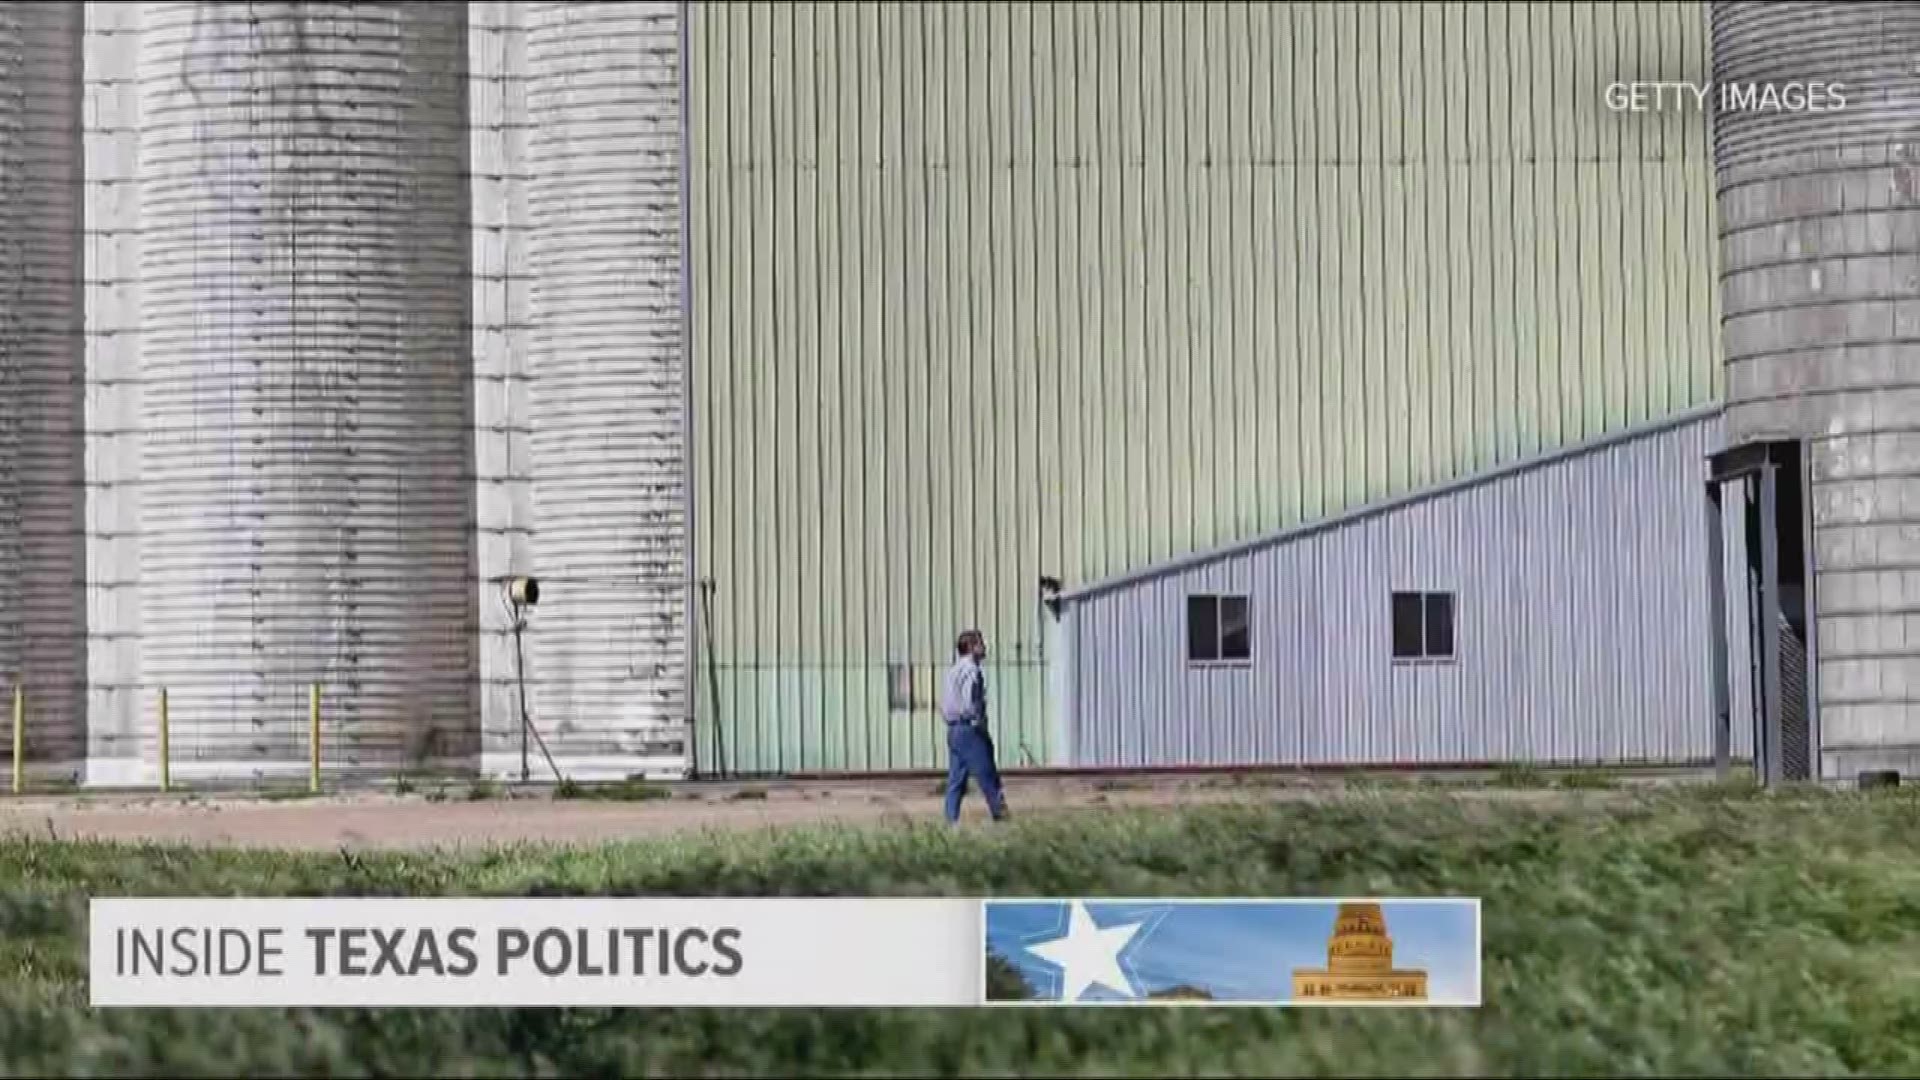 President Trump's trade wars have hurt Texas farmers resulting in significantly less money in their pockets until a few days ago when the president offered handouts. Trump said he would begin paying farmers for the situation he started. Gene Hall, a 40-ye